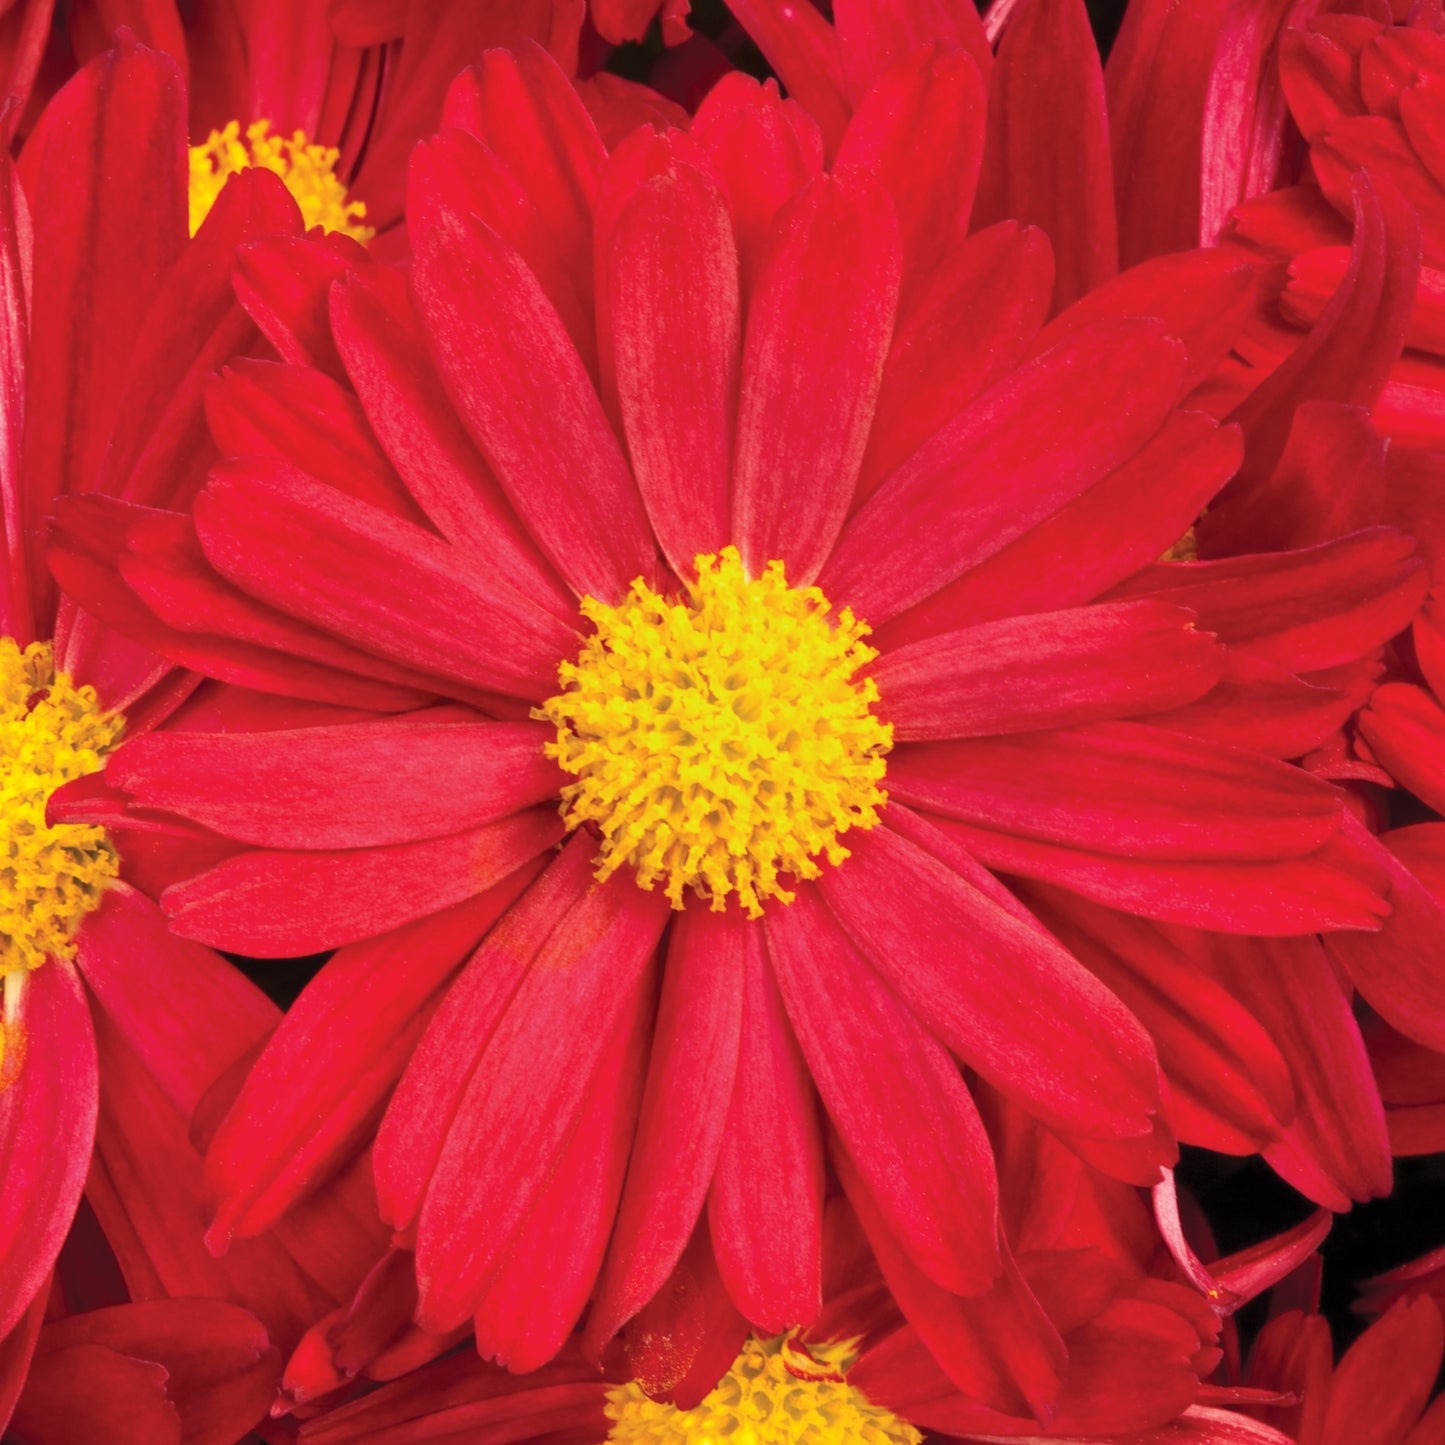 Mums Bonnie Red Plantlings Plus Live Baby Plants 4in. Pot, 2-Pack